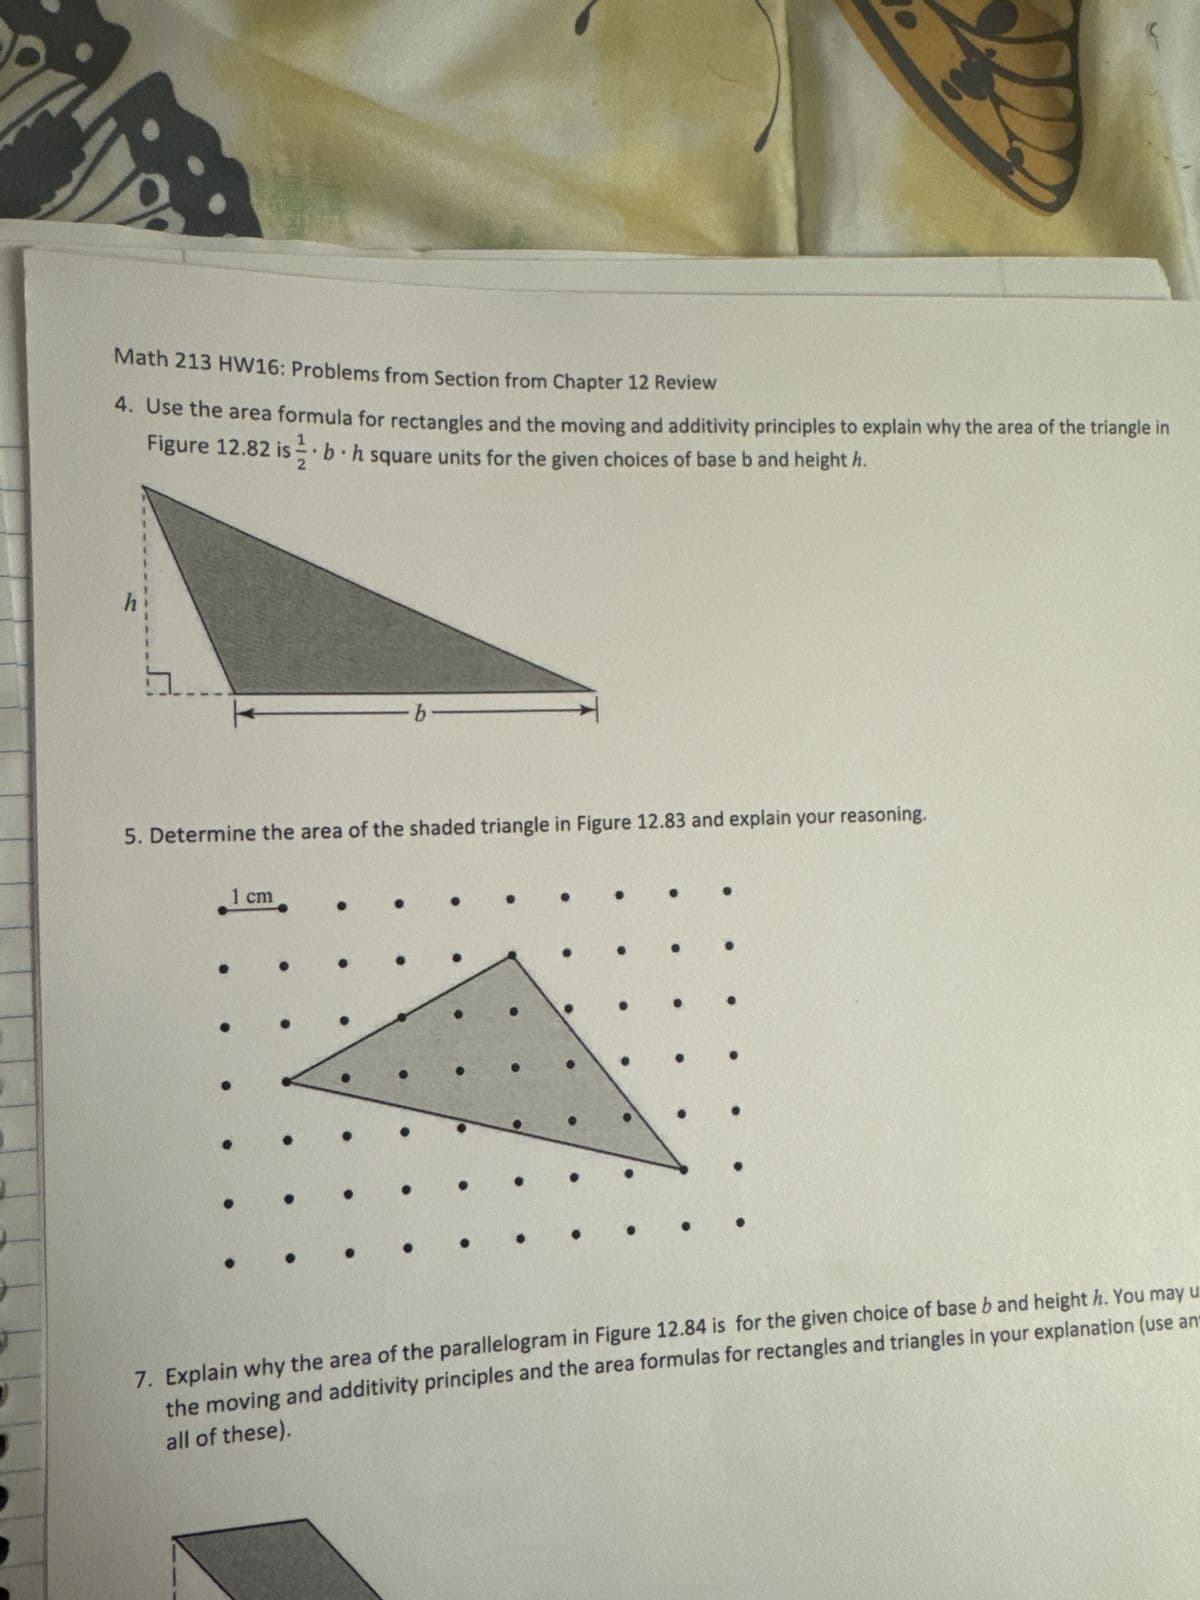 Math 213 HW16: Problems from Section from Chapter 12 Review
4. Use the area formula for rectangles and the moving and additivity principles to explain why the area of the triangle in
Figure 12.82 is 1. b. h square units for the given choices of base b and height h.
-b
5. Determine the area of the shaded triangle in Figure 12.83 and explain your reasoning.
1 cm
.
7. Explain why the area of the parallelogram in Figure 12.84 is for the given choice of base b and height h. You may u
the moving and additivity principles and the area formulas for rectangles and triangles in your explanation (use an
all of these).